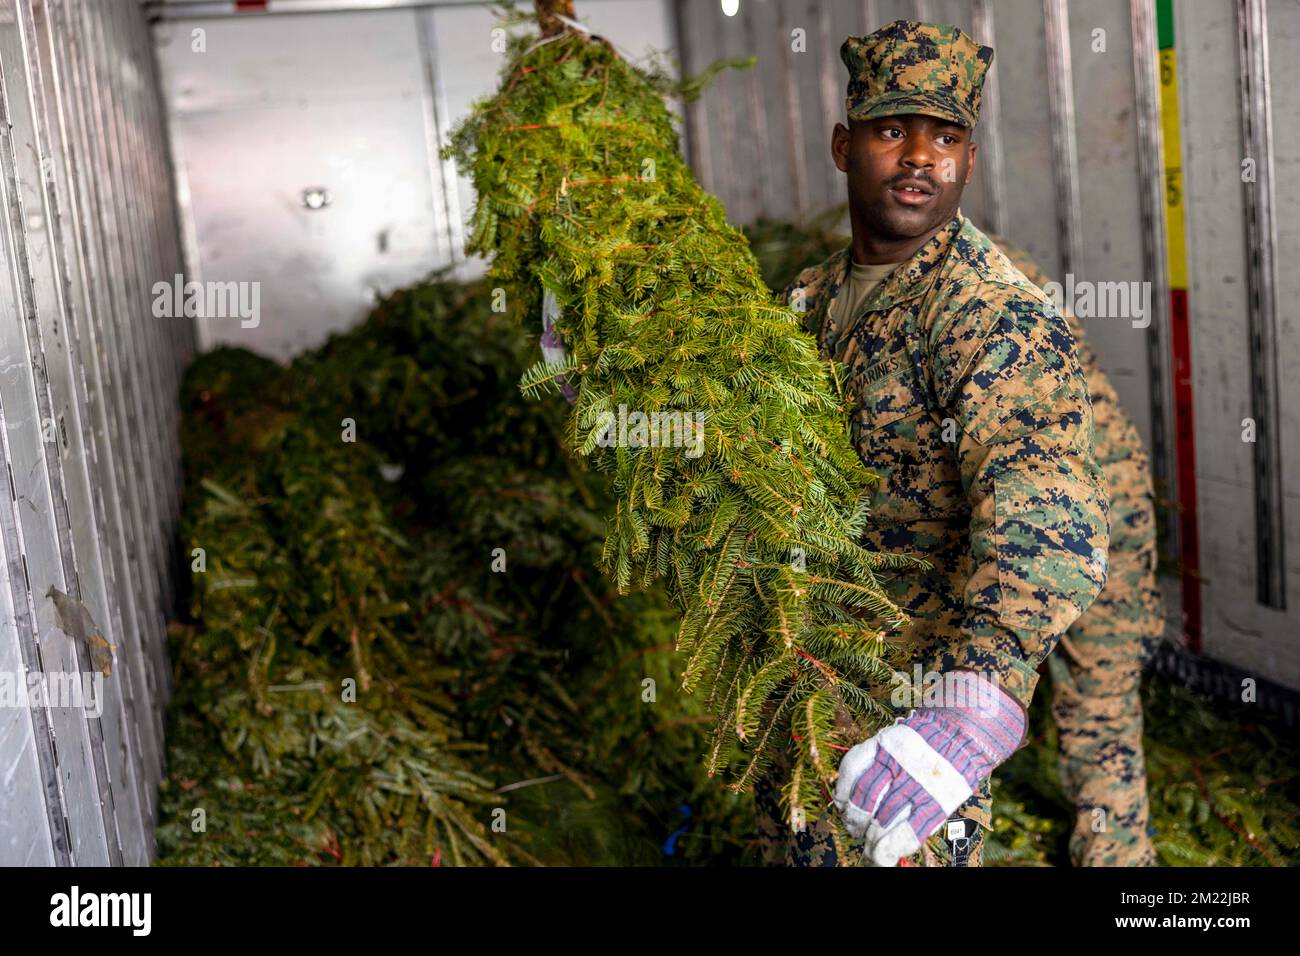 December 2, 2022 - Marine Corps Air Station Cherry, North Carolina, USA - U.S. Marine Corps Lance Cpl. Joshua Henry, a aircraft and rescue Marine with Headquarters and Headquarters Squadron, Marine Corps Air Station (MCAS) Cherry Point, unloads Christmas trees from the truck during Trees for Troops at MCAS Cherry Point, North Carolina, December. 2, 2022. Trees for Troops provides free, farm-grown Christmas trees to service members in all branches of the military. MCAS Cherry Point has been included in the Trees for Troops Program for 14 years to show appreciation to service members away from Stock Photo